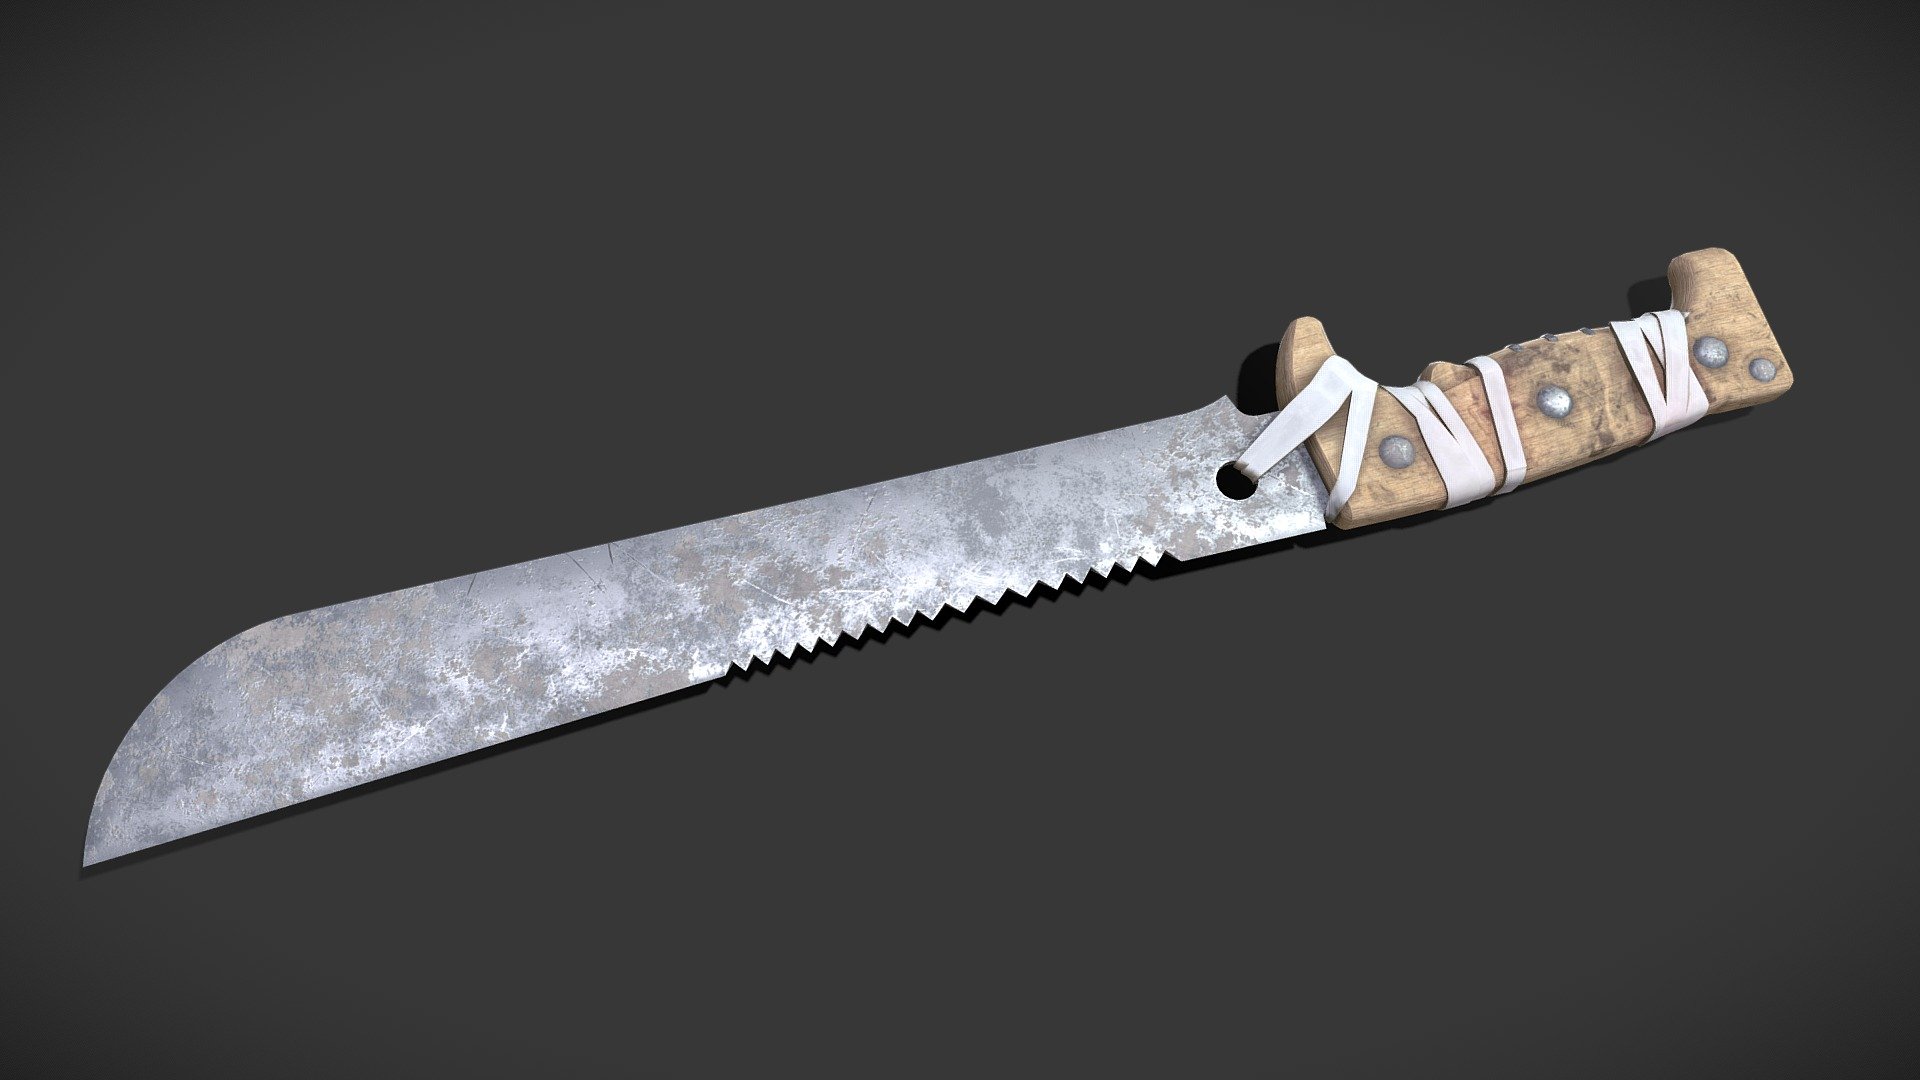 Machete




-Low-poly ready to use in Games, AR/VR (2979 Tris)

-Created in 3ds MAX 2018 no plugins used.

-Textures are in PNG format 2048x2048 PBR metalness 1 set.

-Files unit: Centimeters

-Available formats: MAX 2018 and 2015, OBJ, MTL, FBX, .tbscene.

-If you need any other file format you can always request it.

-All formats include materials and textures.
 - Machete - Buy Royalty Free 3D model by MaX3Dd 3d model